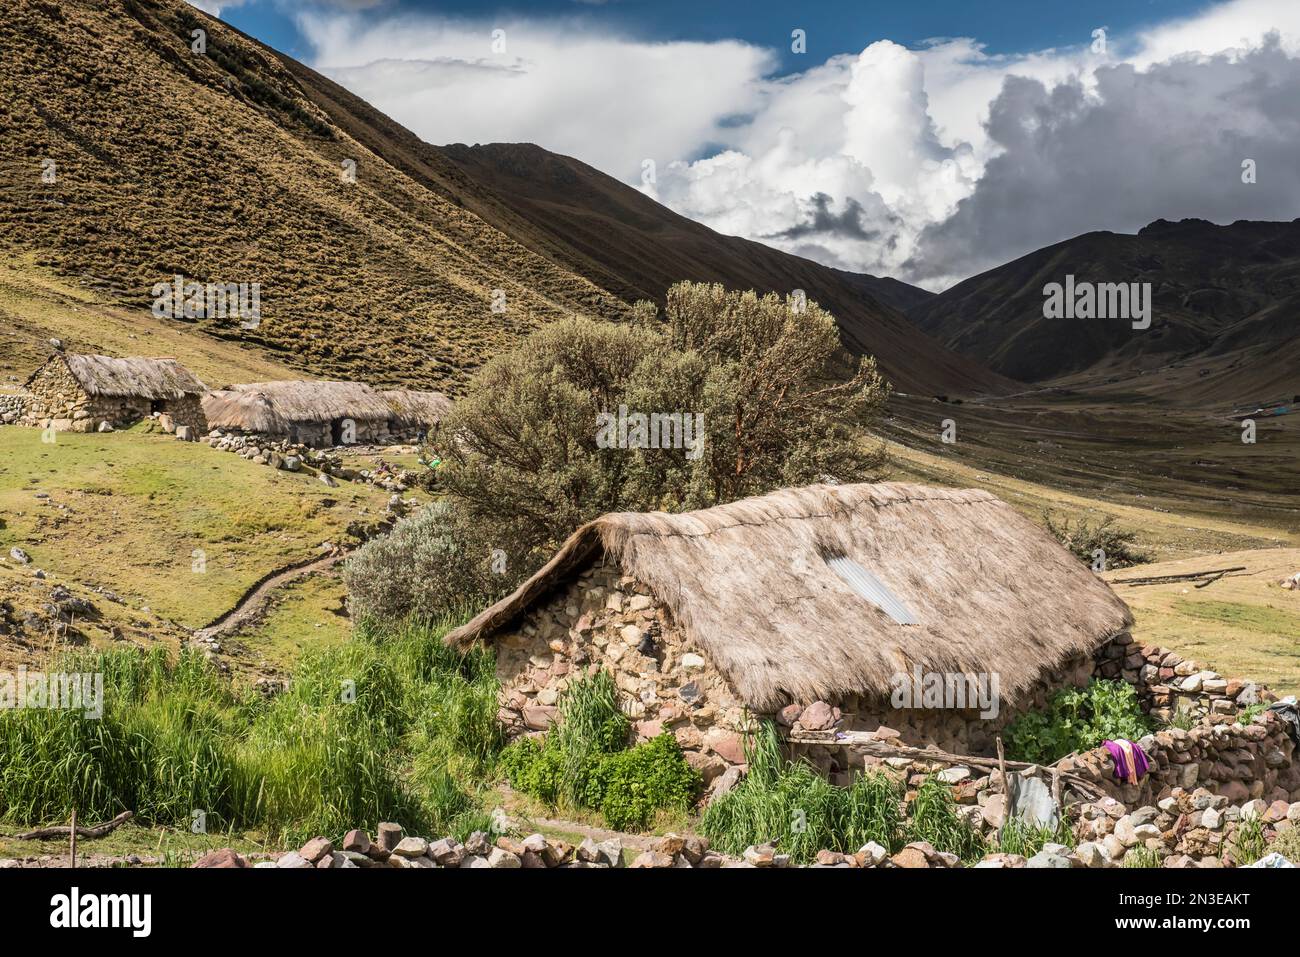 Farming community in the Lares Valley with the Andes Mountains looming over the stone houses with thatched roofs; Lares Valley, Cusco, Peru Stock Photo